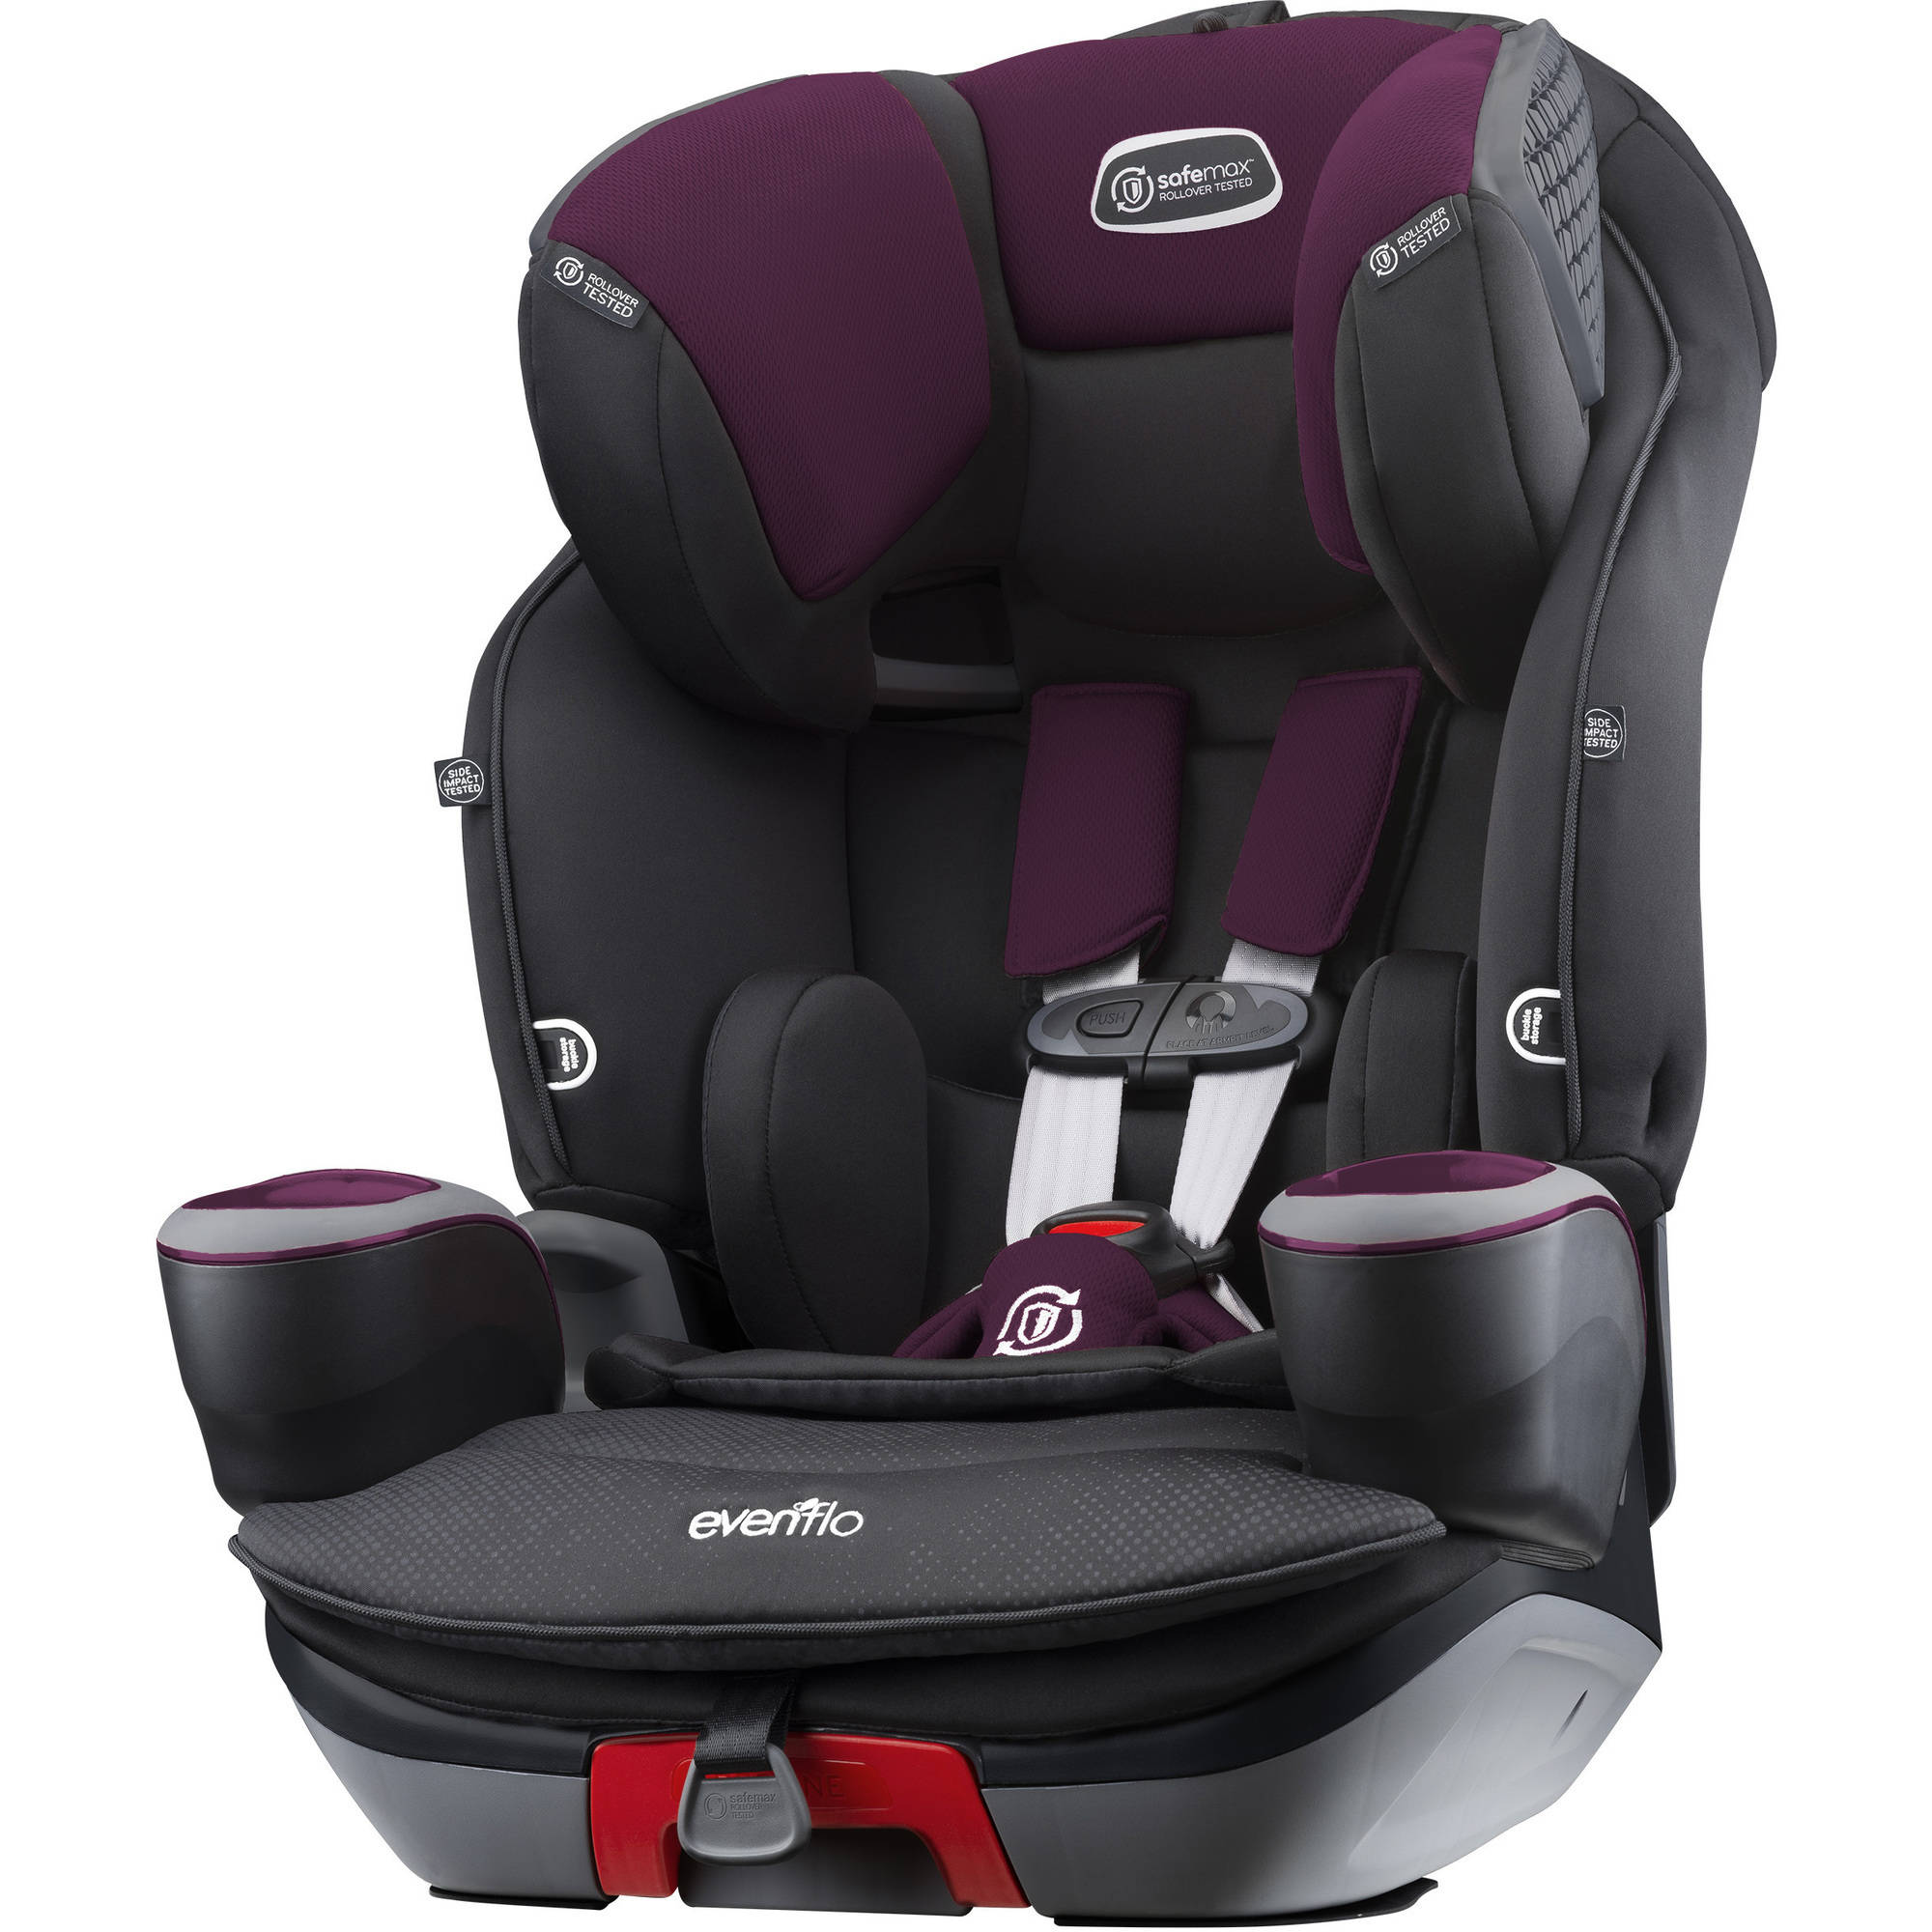 Evenflo SafeMax 3-in-1 Harness Booster Car Seat, Purple Berry - image 1 of 17